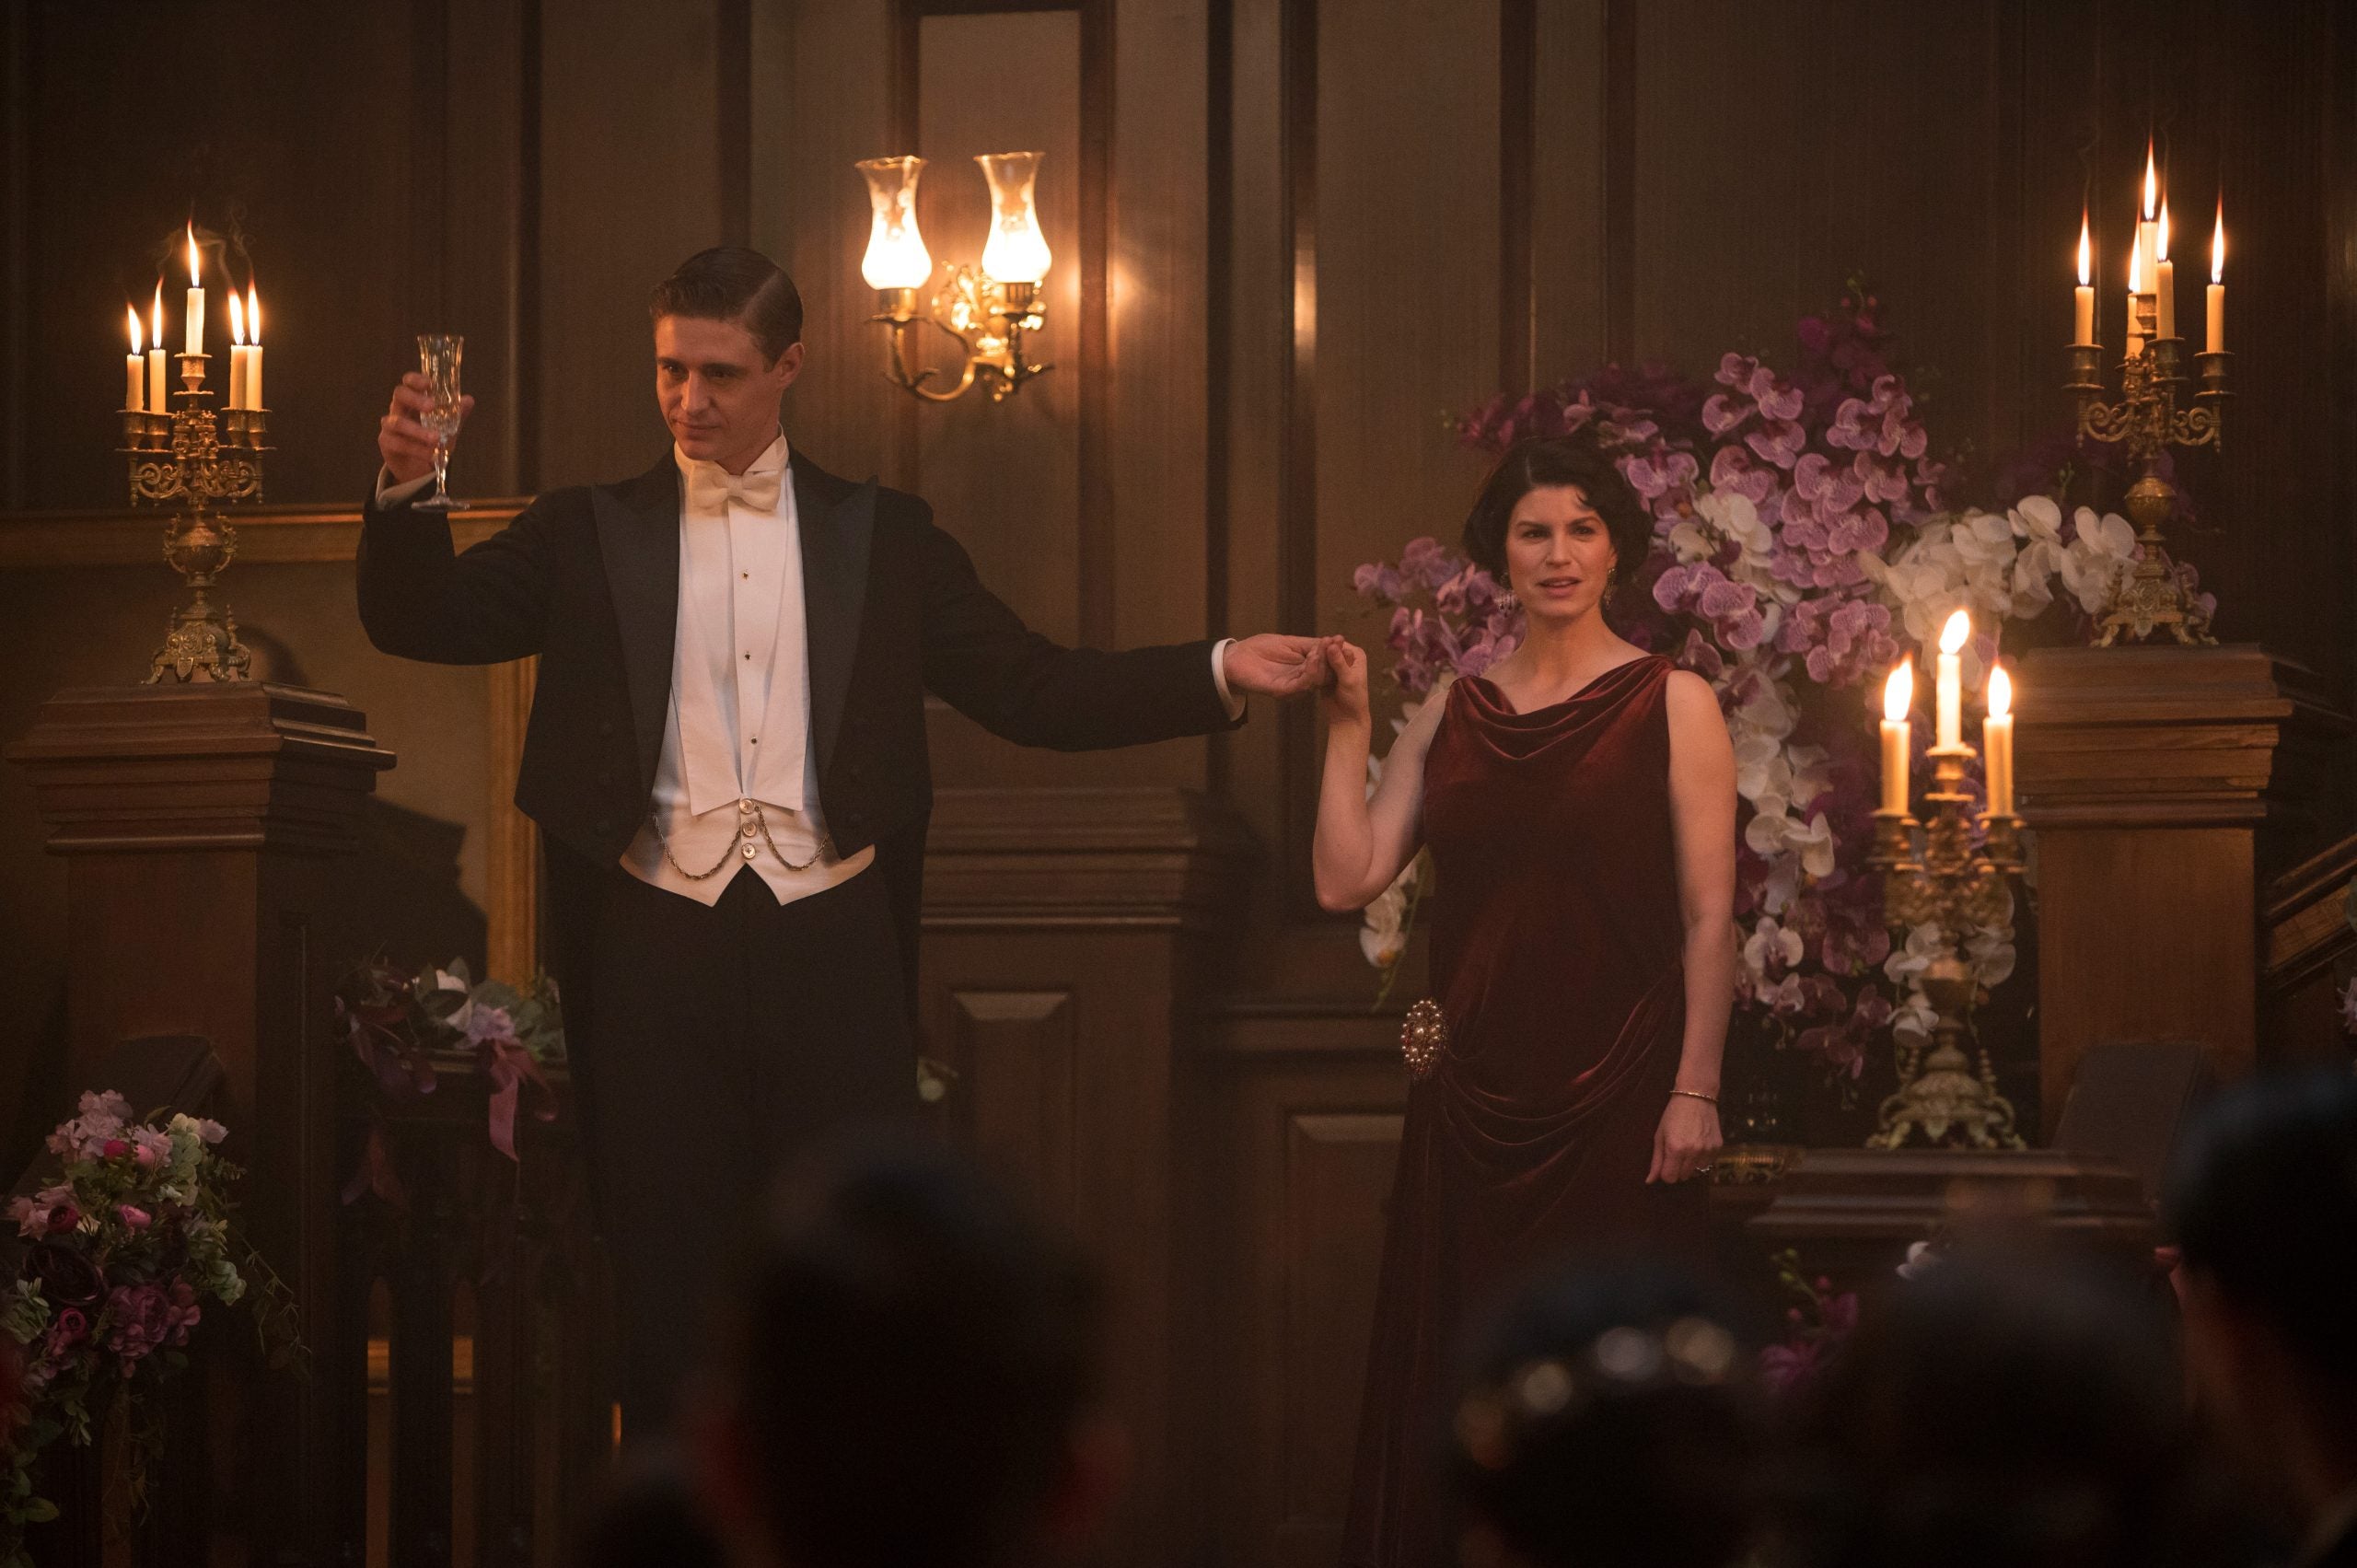 Max Irons and Jemima Rooper holding hands in 'Flowers in the Attic: The Origin'